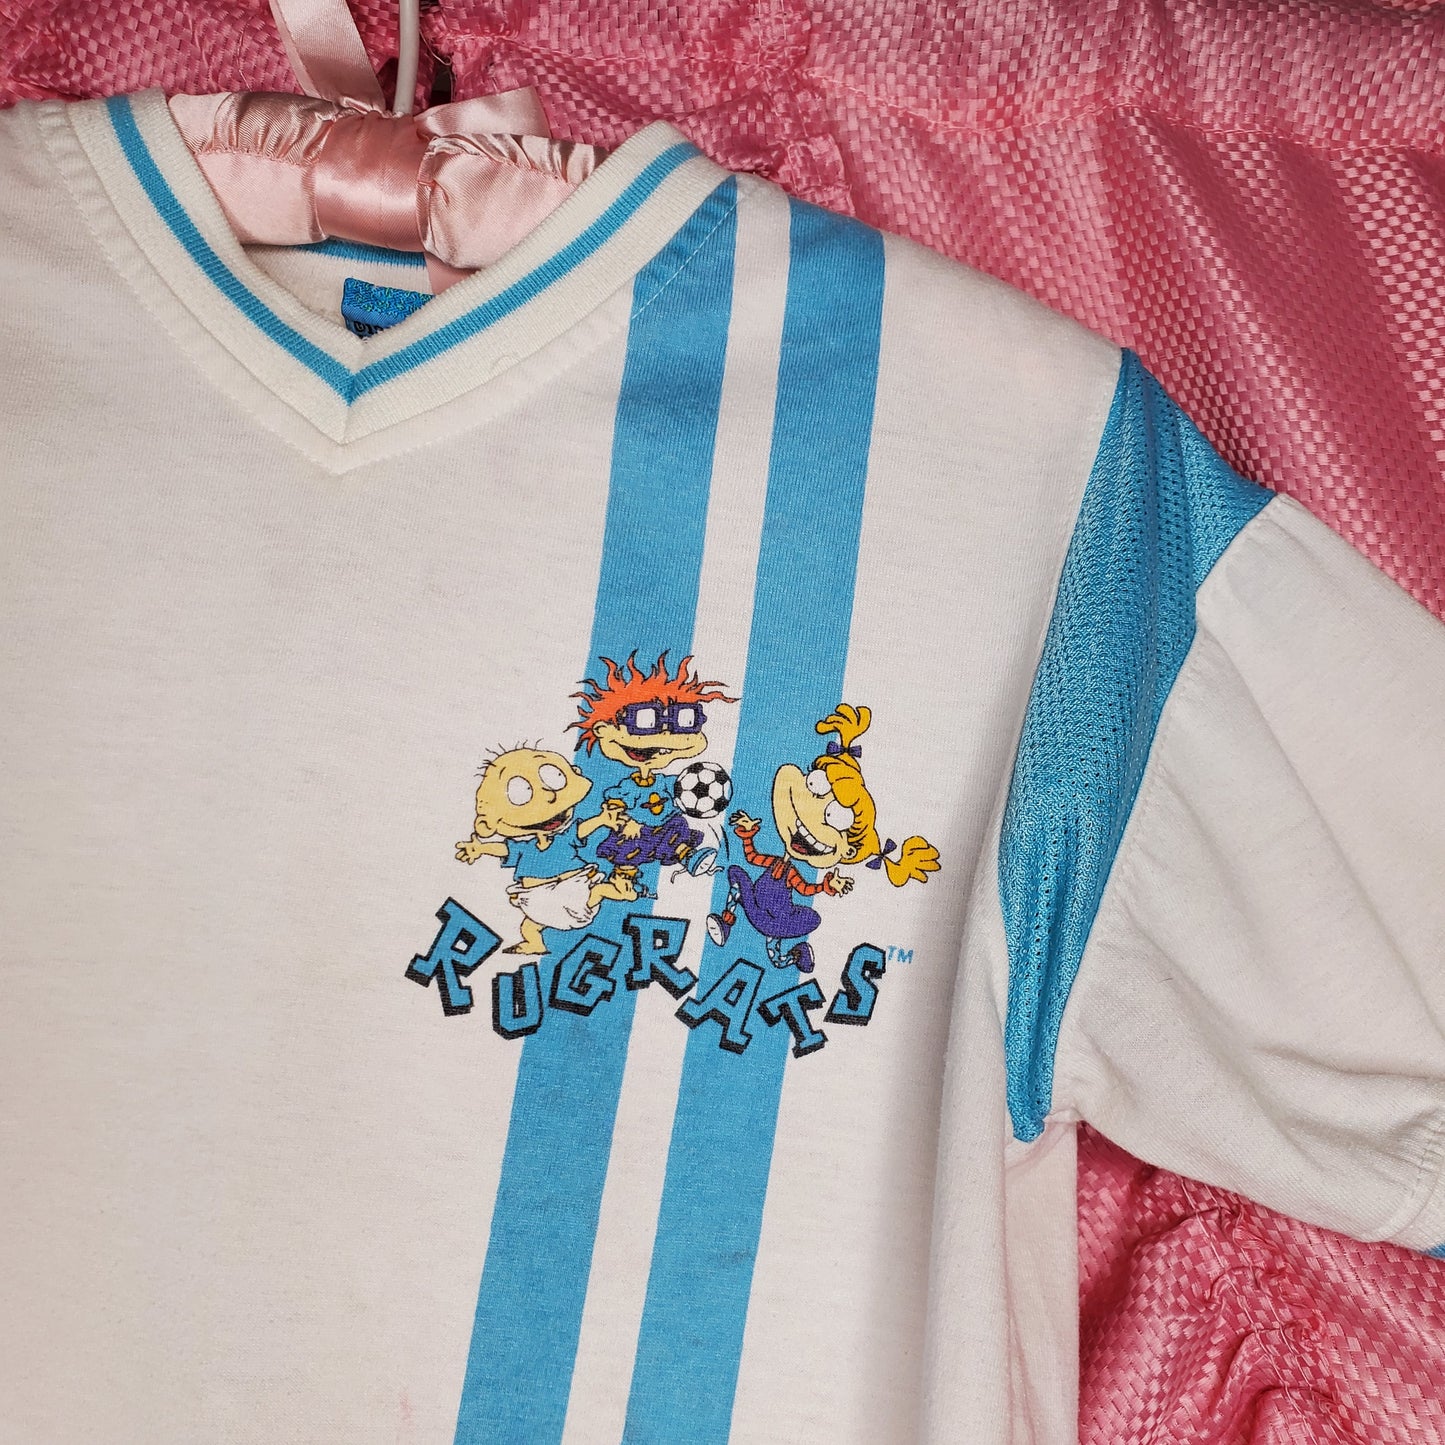 1996 Rugrats sporty tee